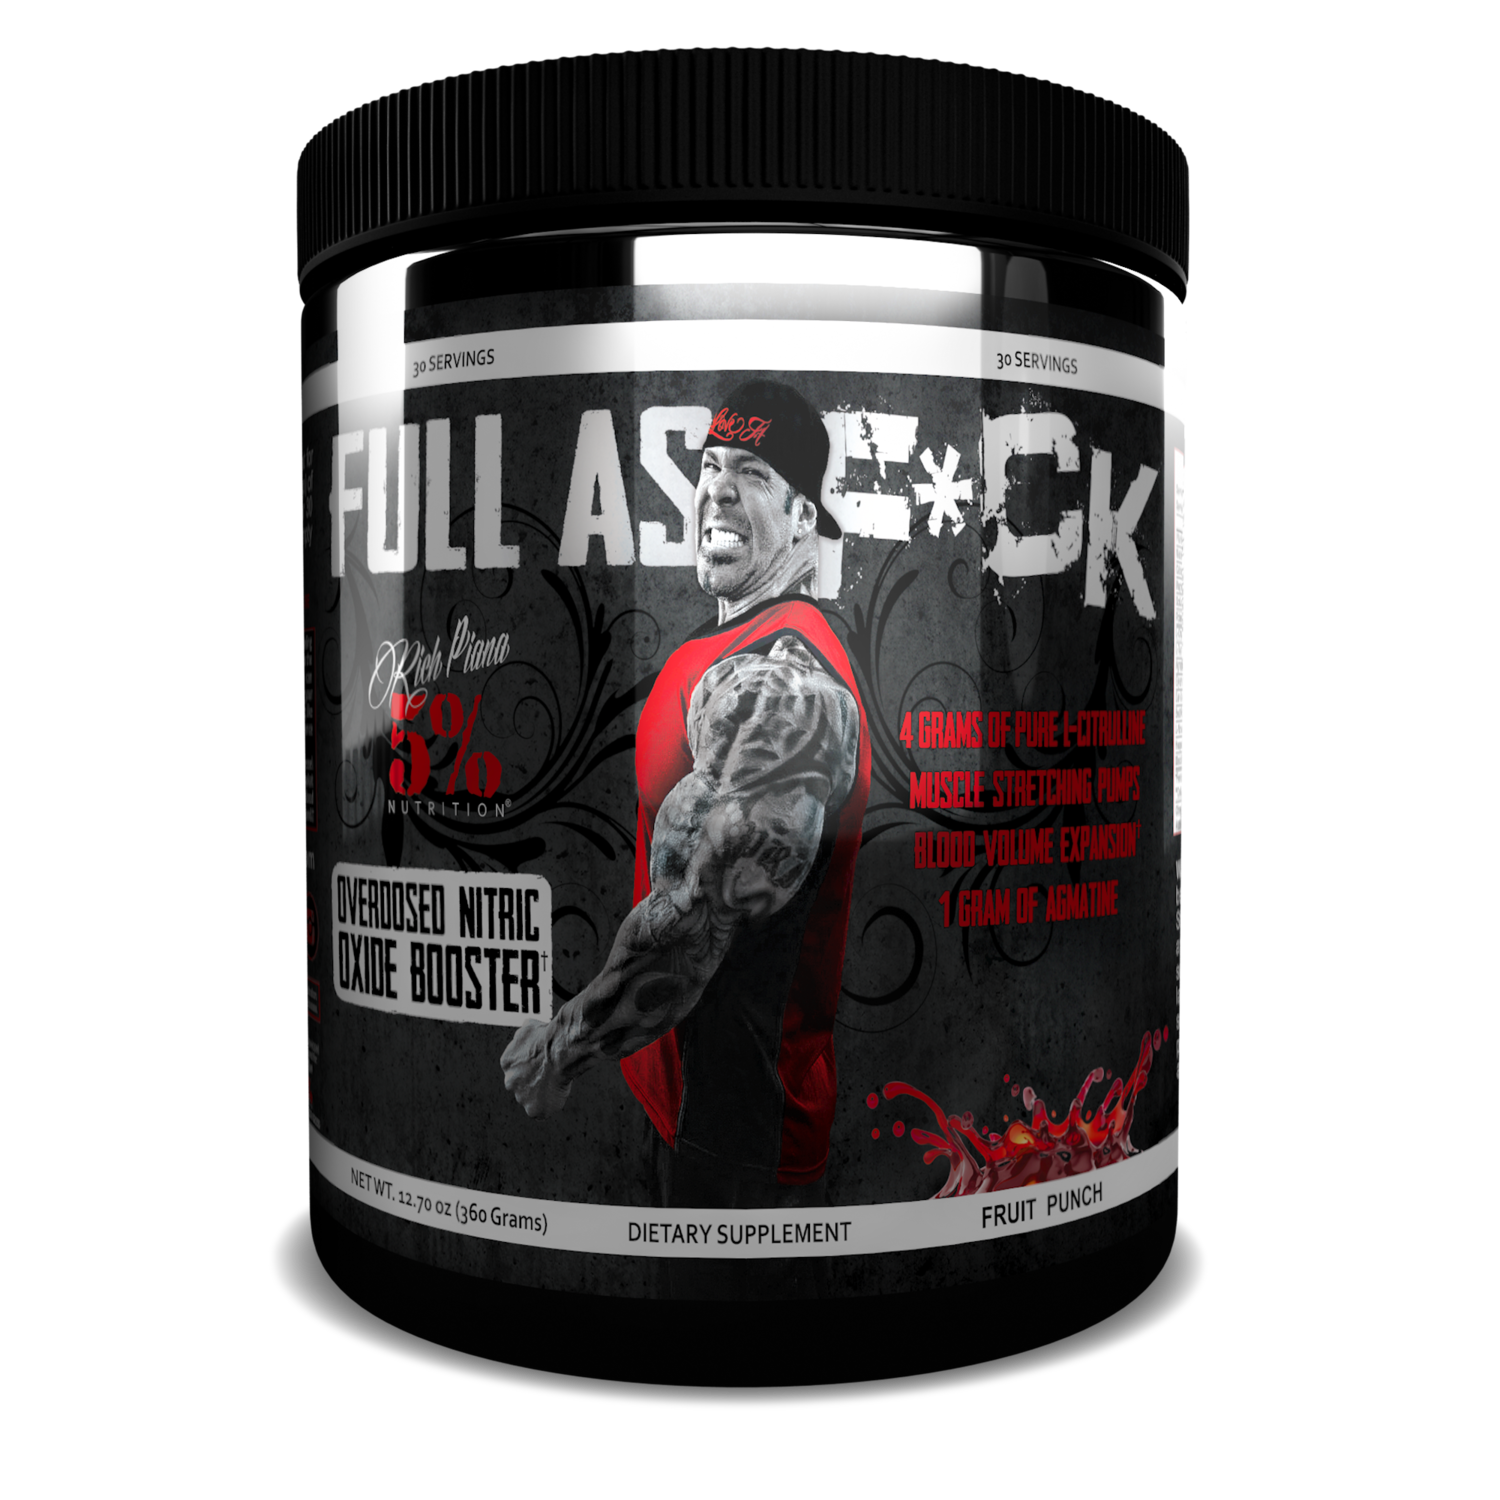 Rich Piana 5% Nutrition Full As F*ck Nitric Oxide Booster